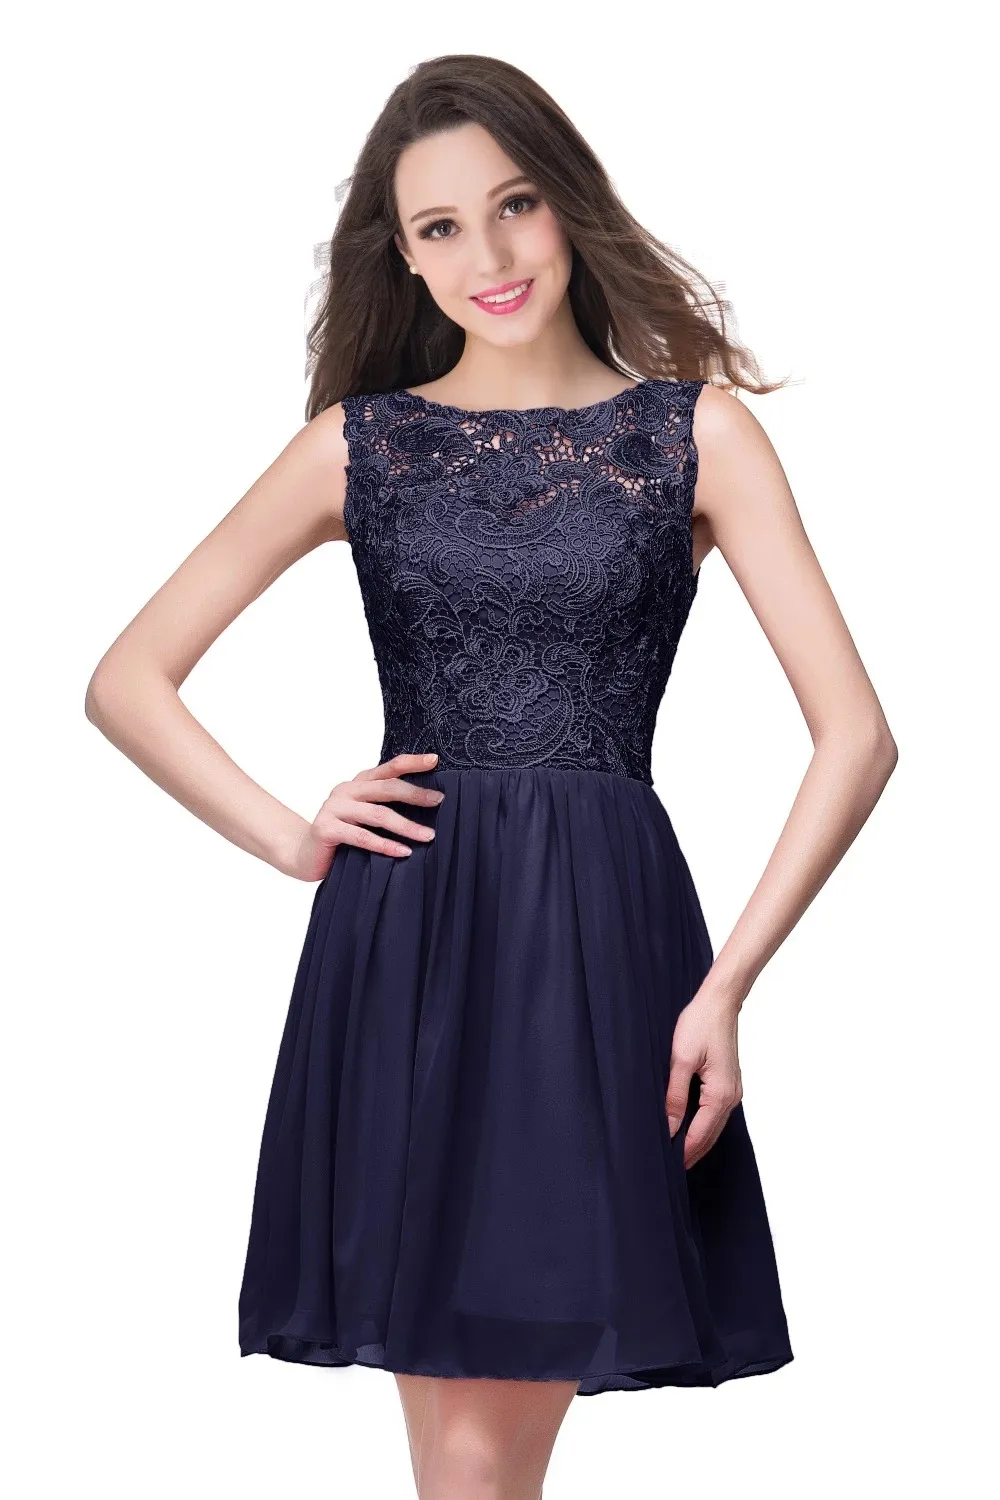 Women Floral Lace Casual Dresses Short Dress For Holiday Sexy Hollow out Chiffon Midi Party Dresses Vestidos Robe Femme CPS164